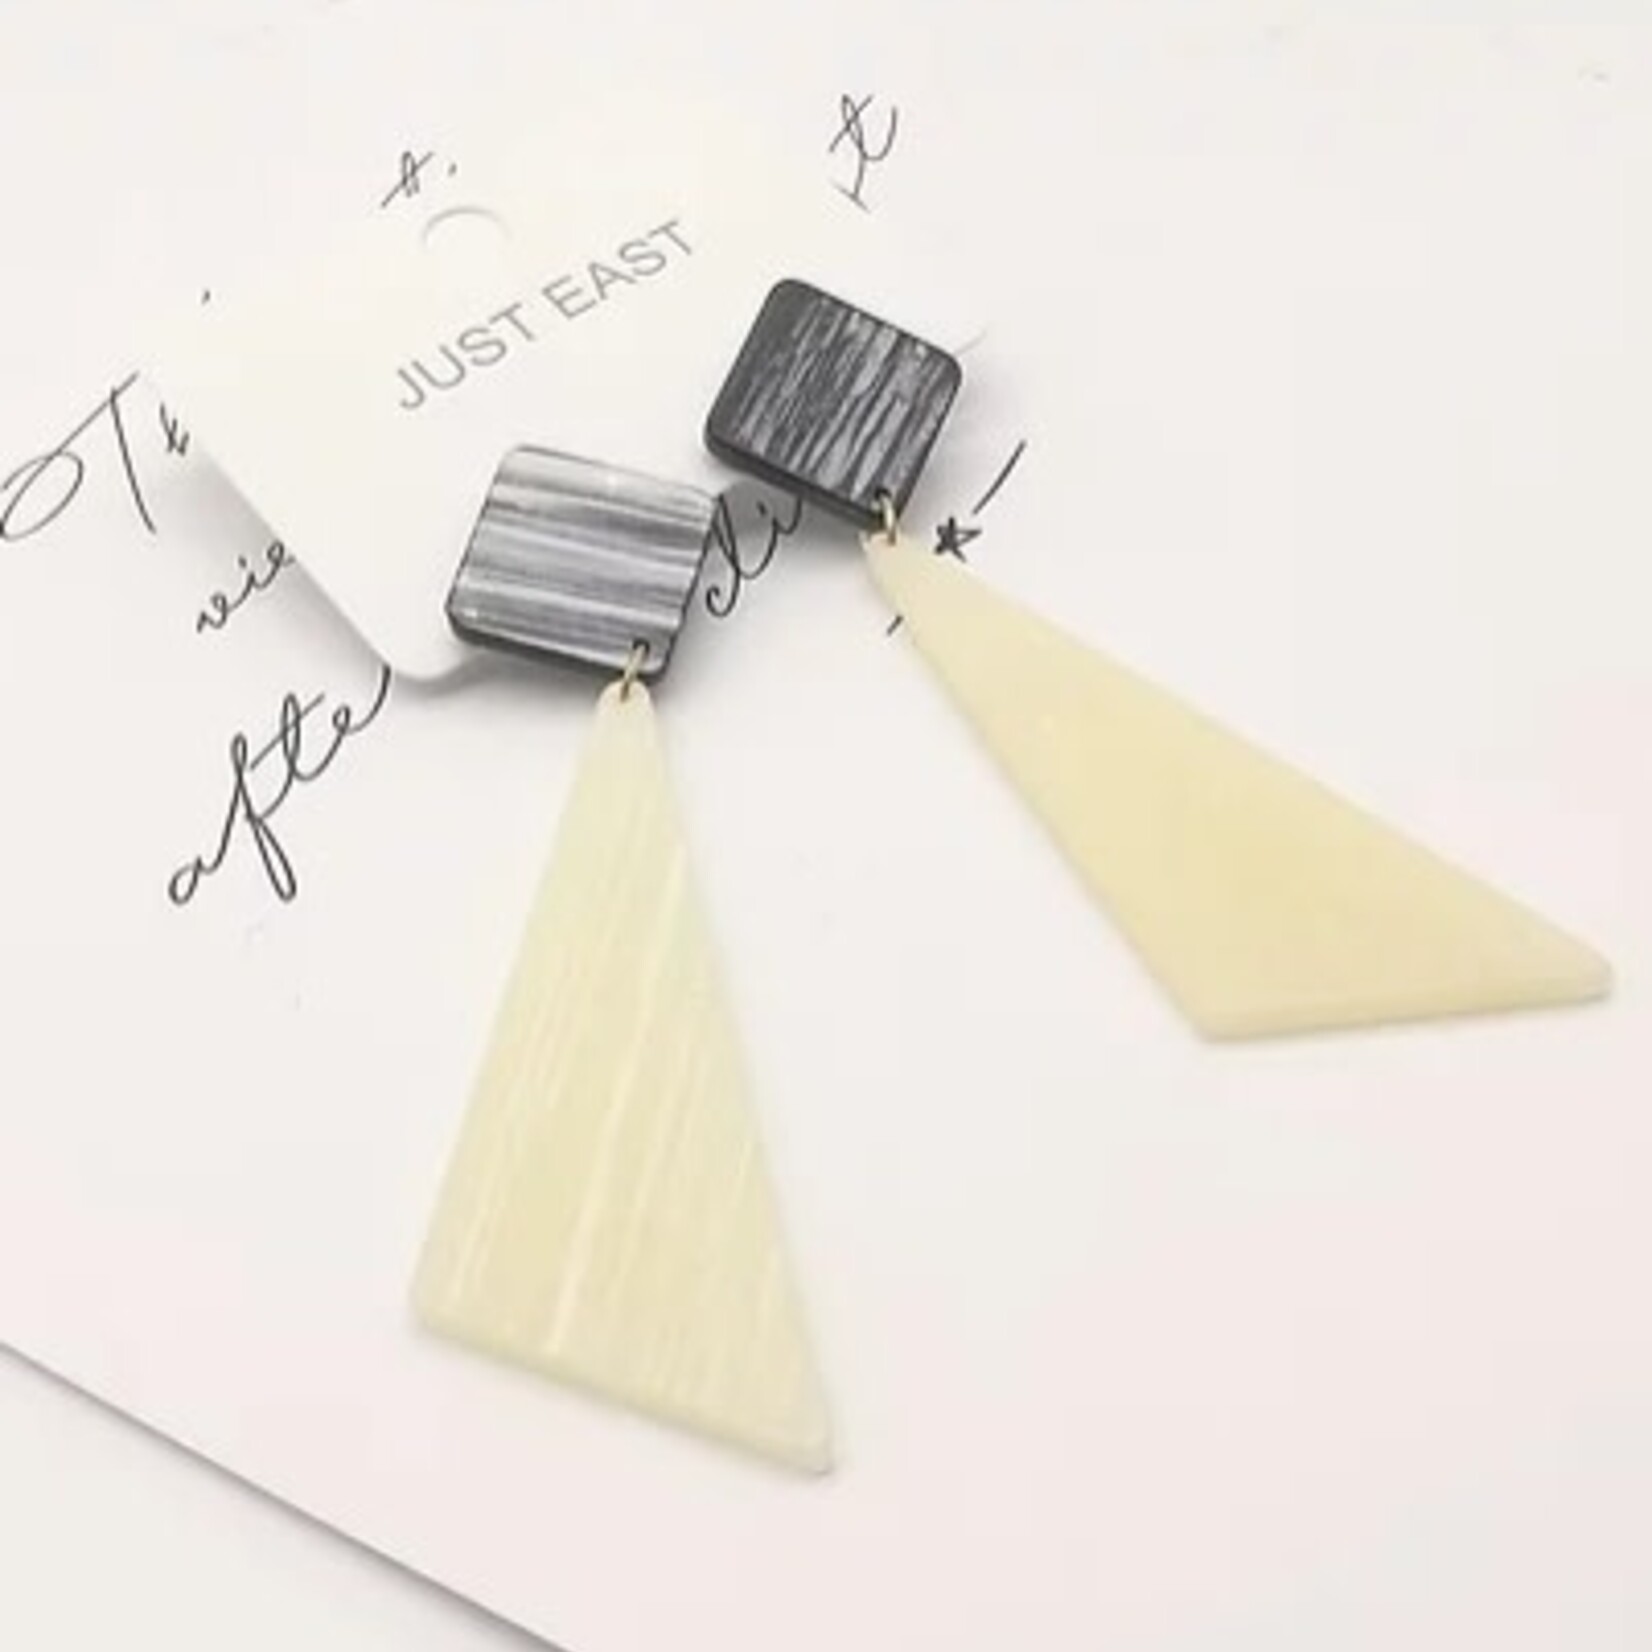 Just East Cream & Grey Resin Triangle Earring